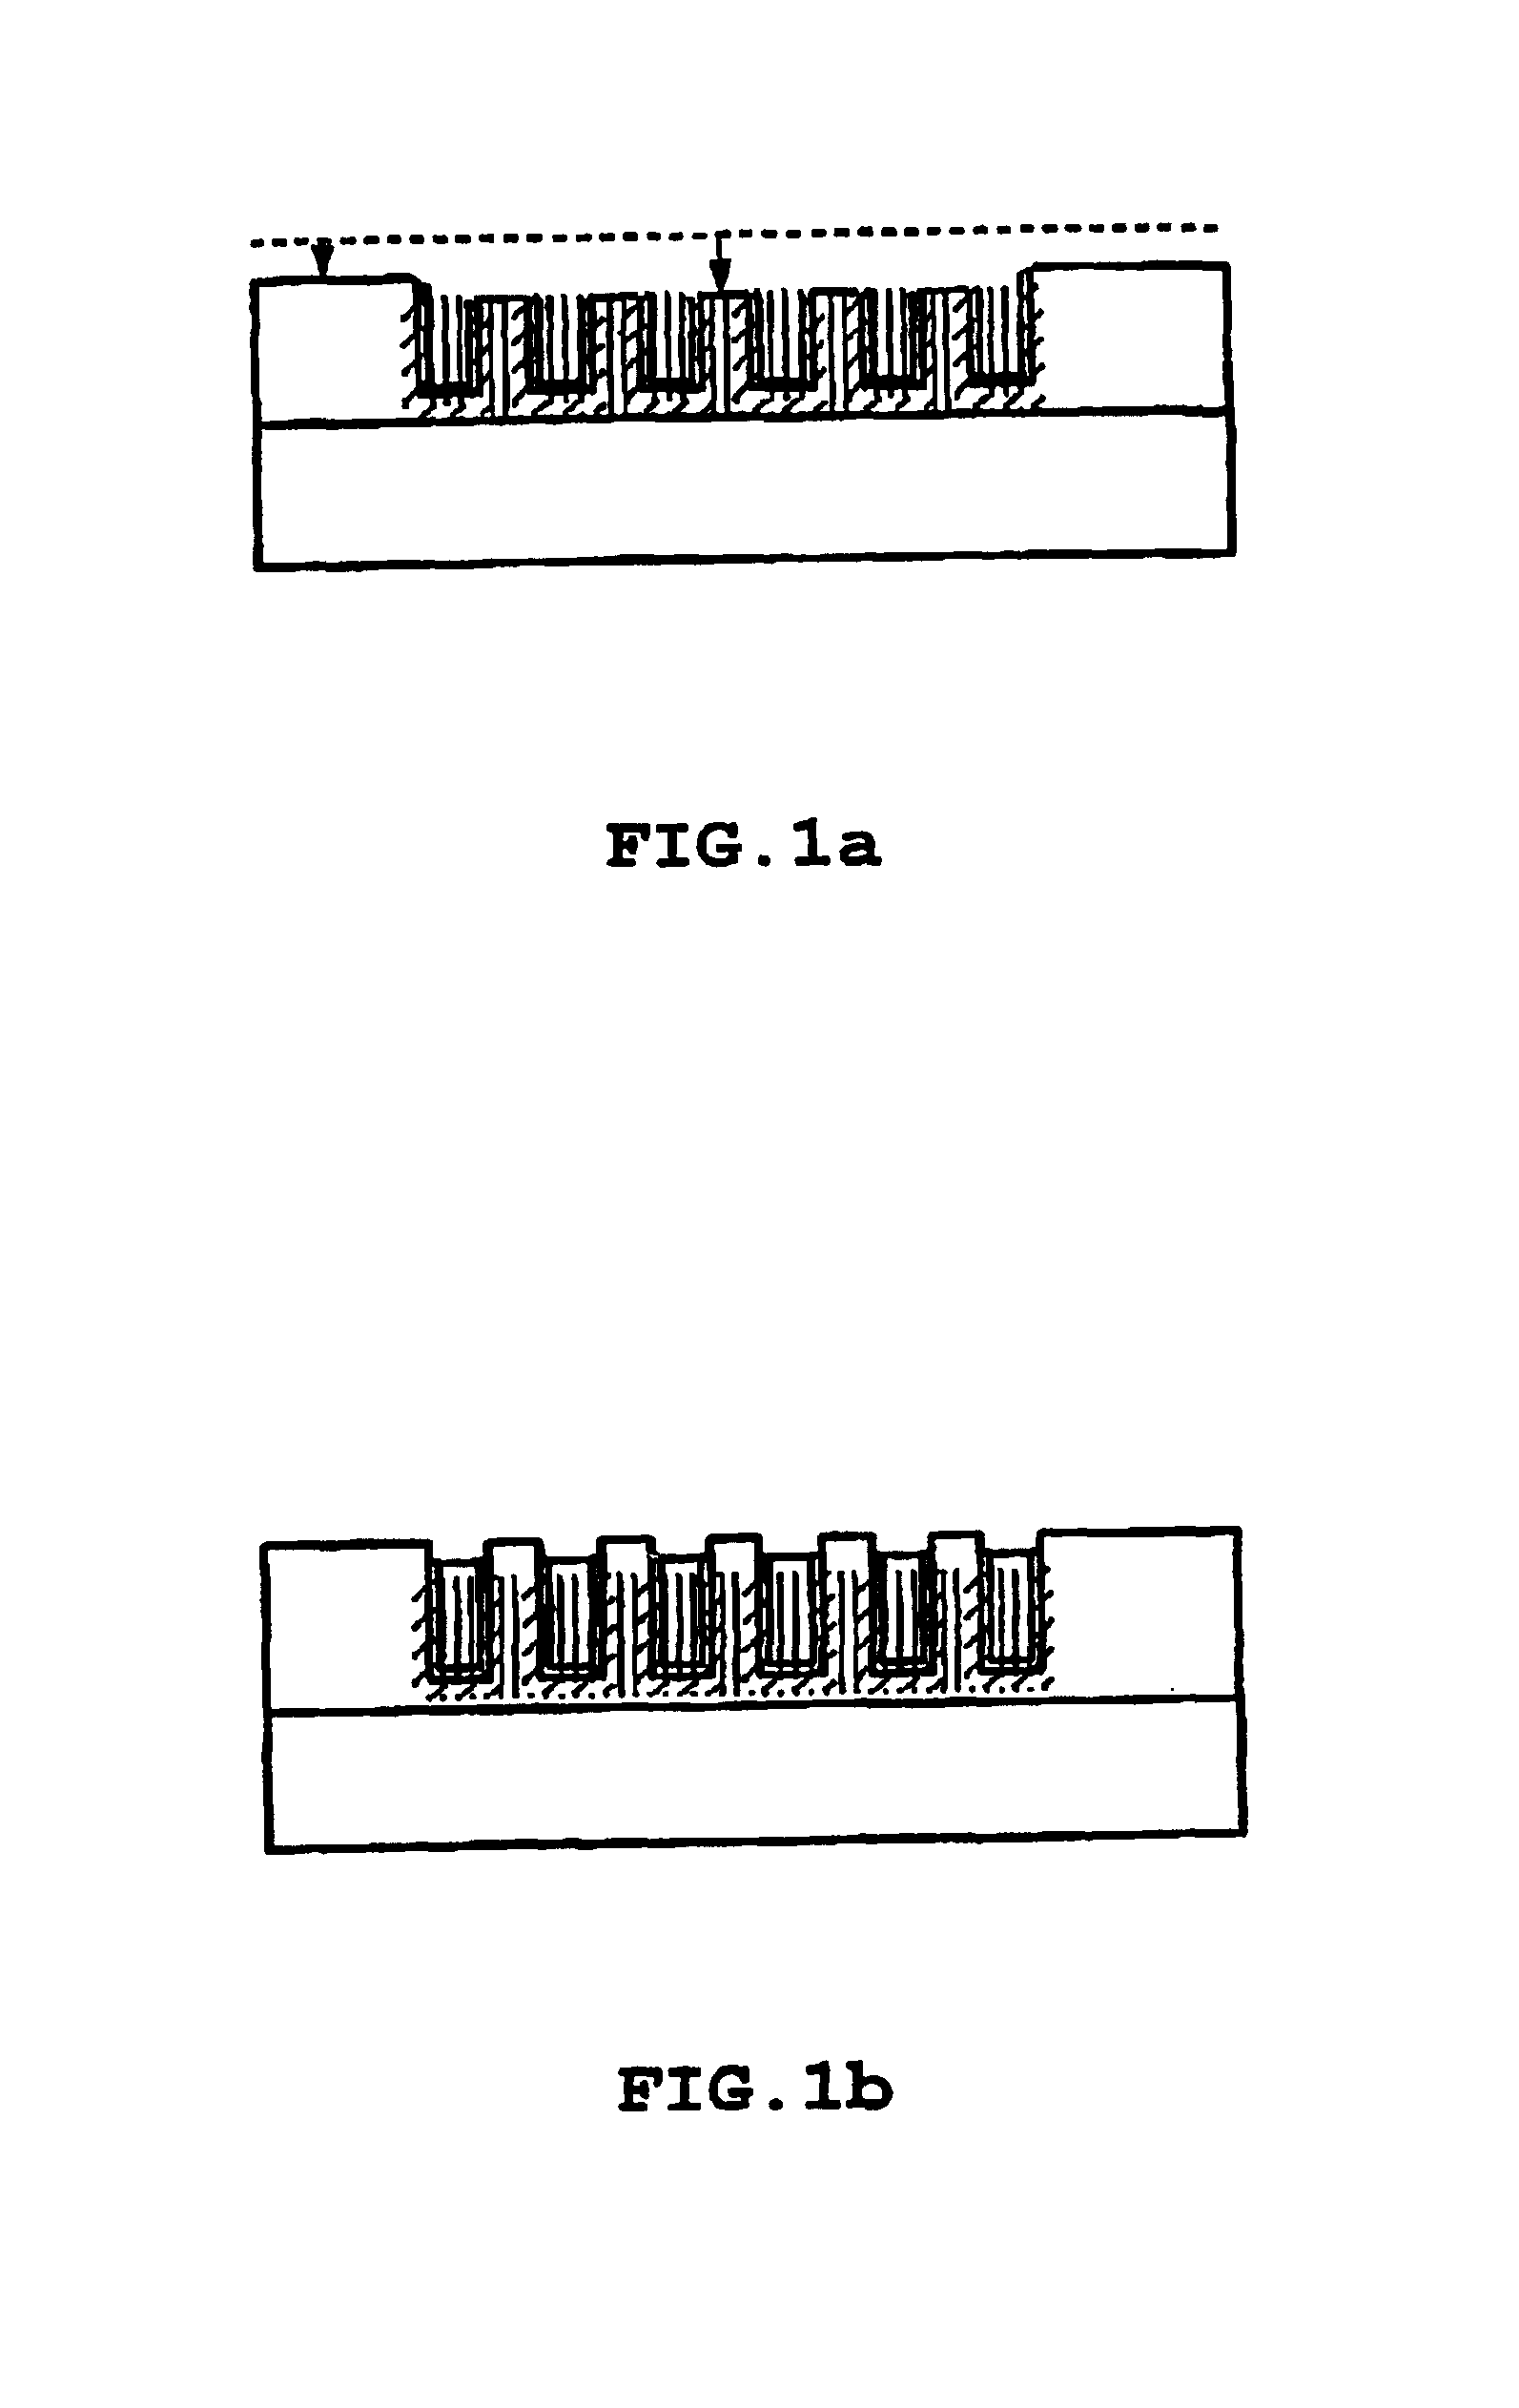 Slurry composition for use in chemical mechanical polishing of metal wiring